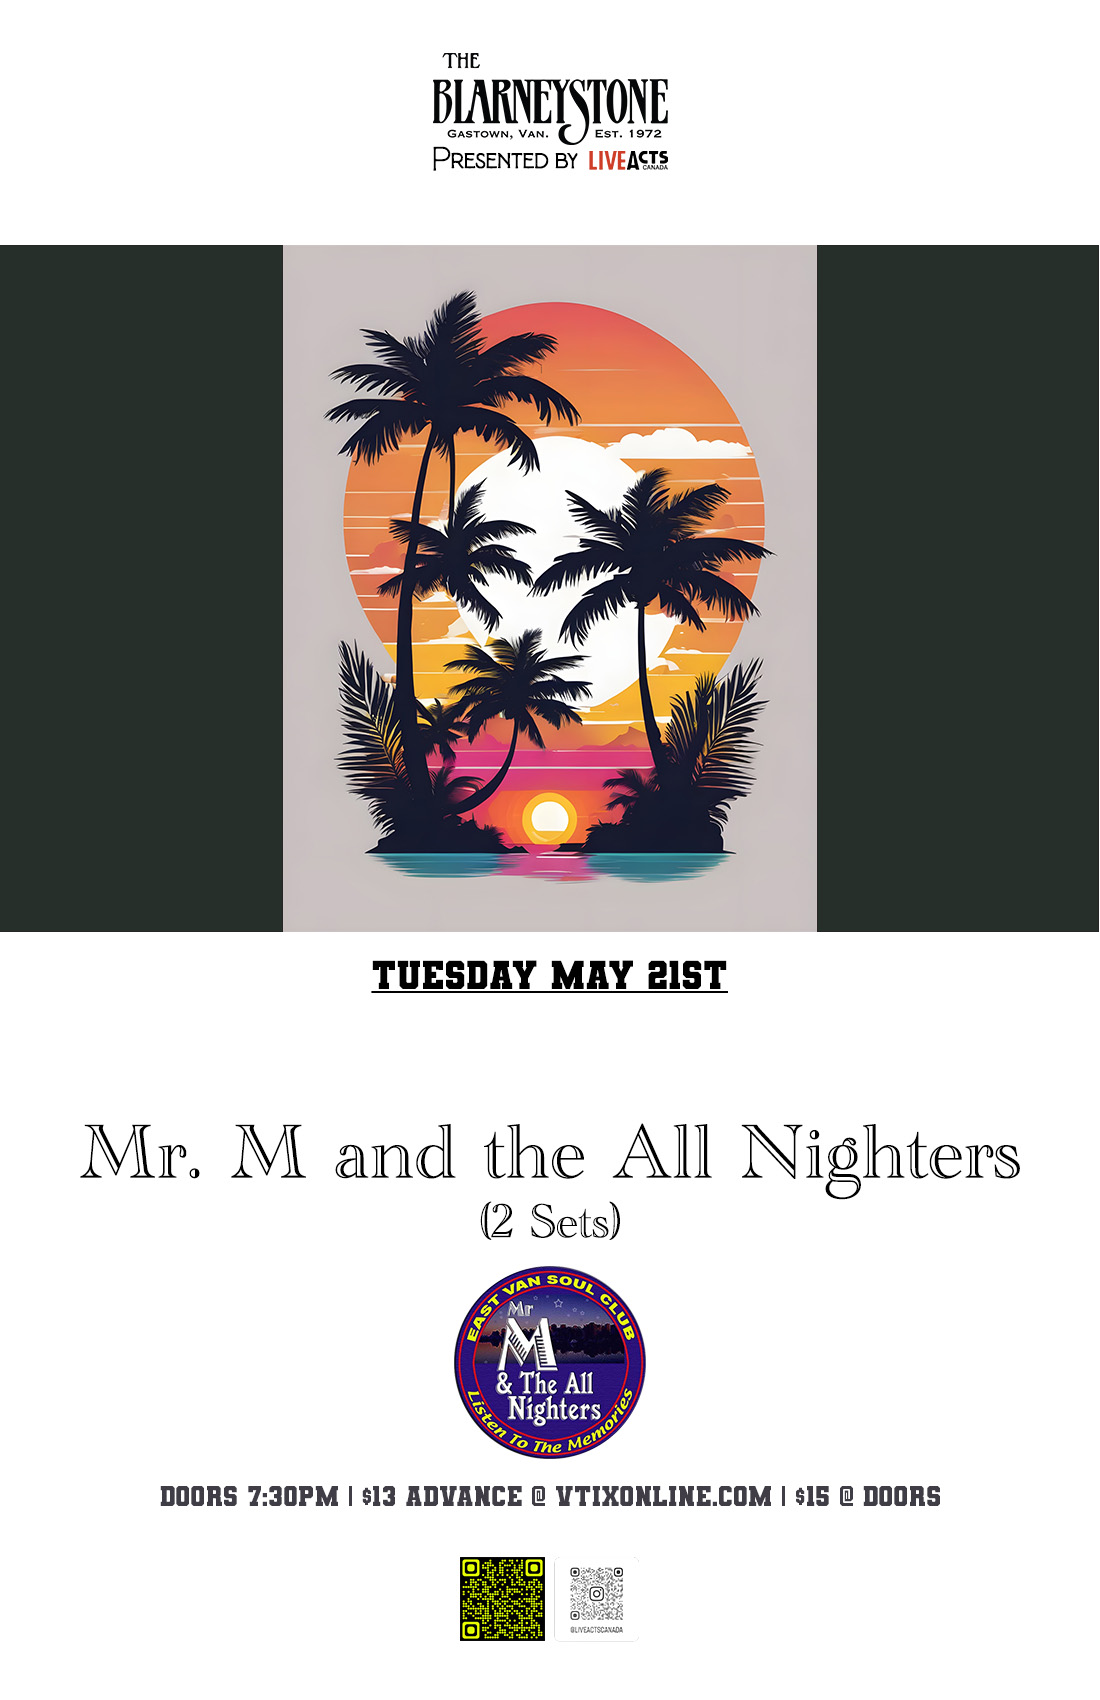 Mr M And The All Nighters live at The Blarney Stone